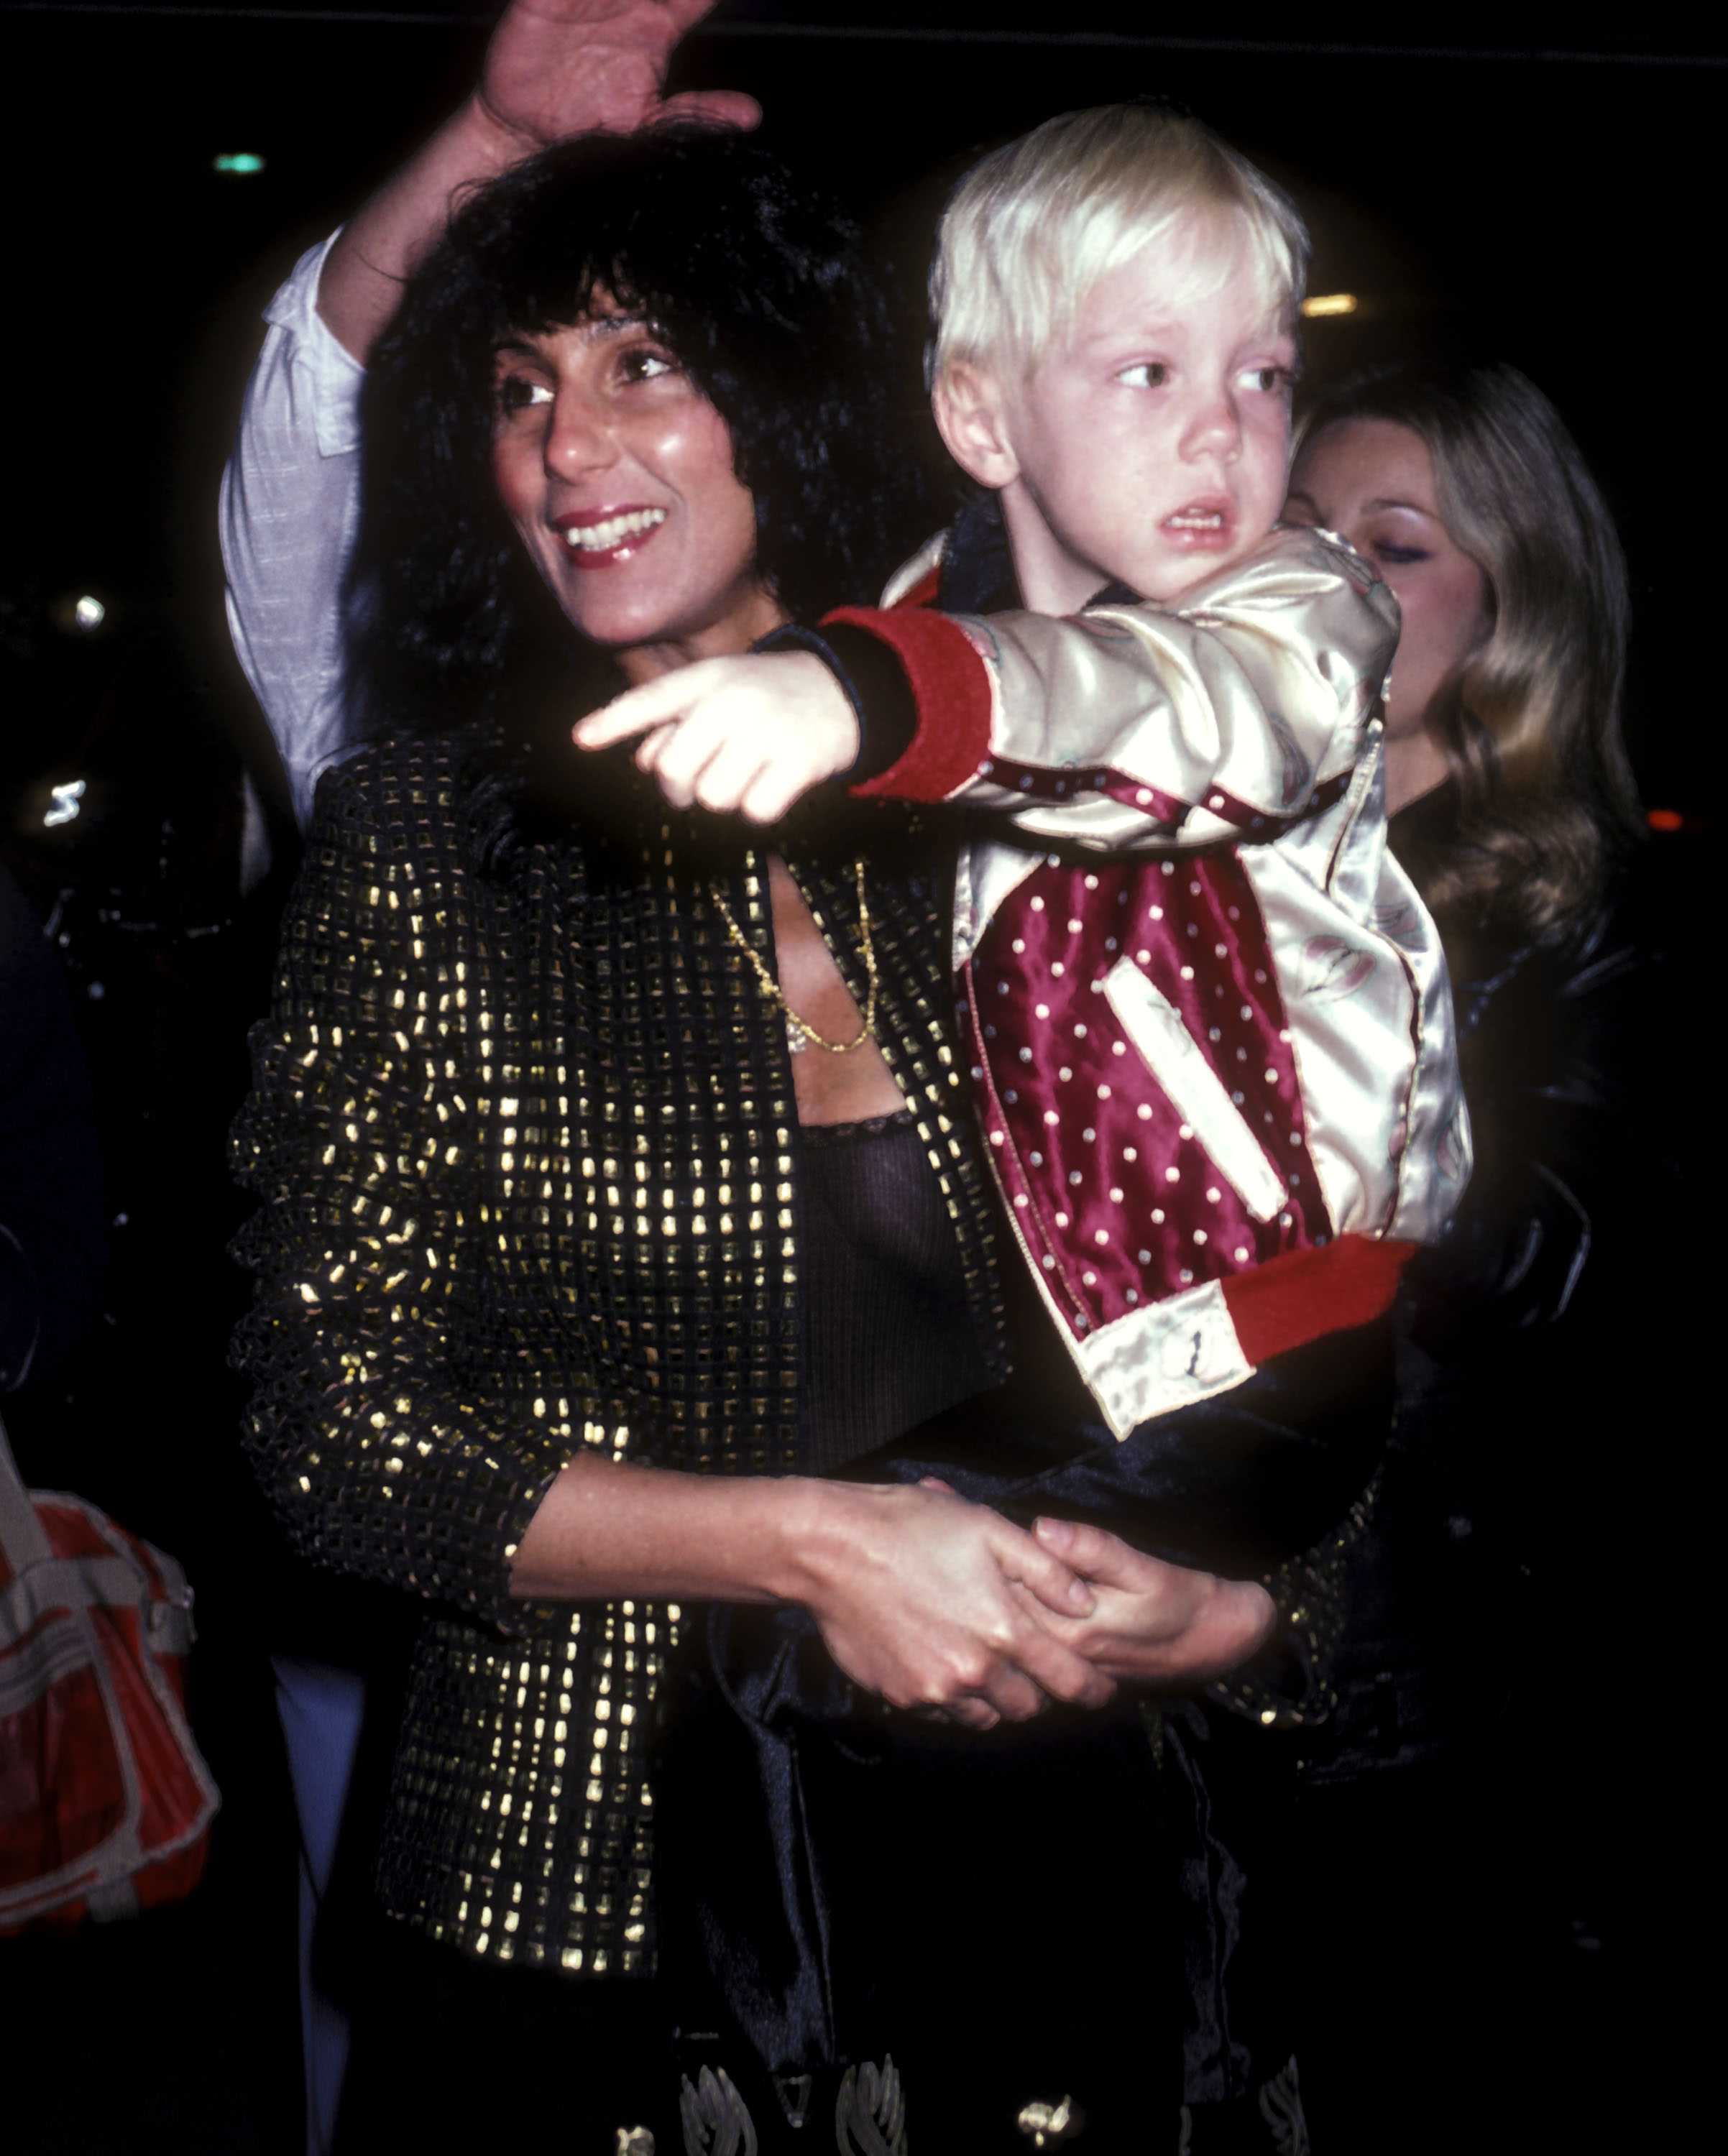 Cher and son Elijah Blue Allman attend the opening night performance of "The Rocky Horror Picture Show" on February 24, 1981 in Hollywood, California | Source: Getty Images